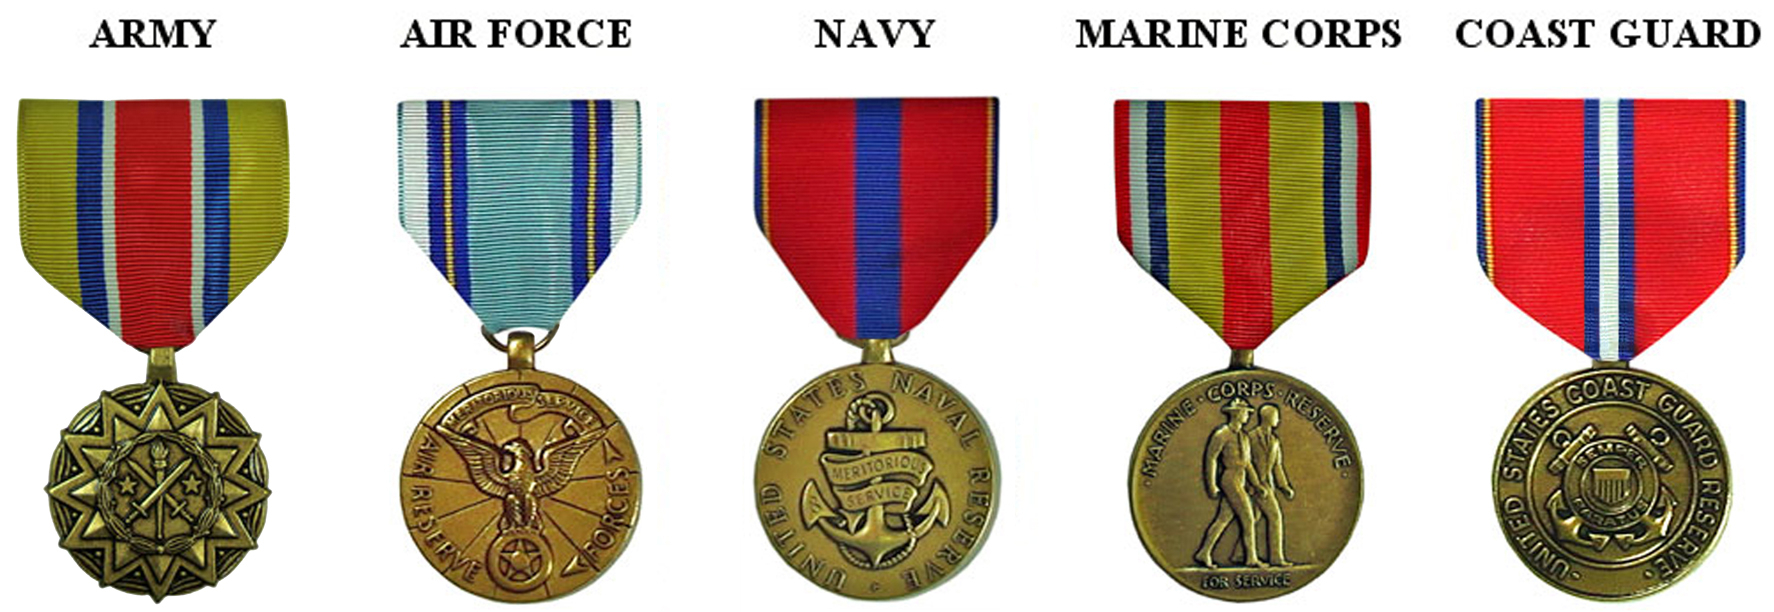 Reserve Good Conduct Medal – Wikipedia Inside Army Good Conduct Medal Certificate Template